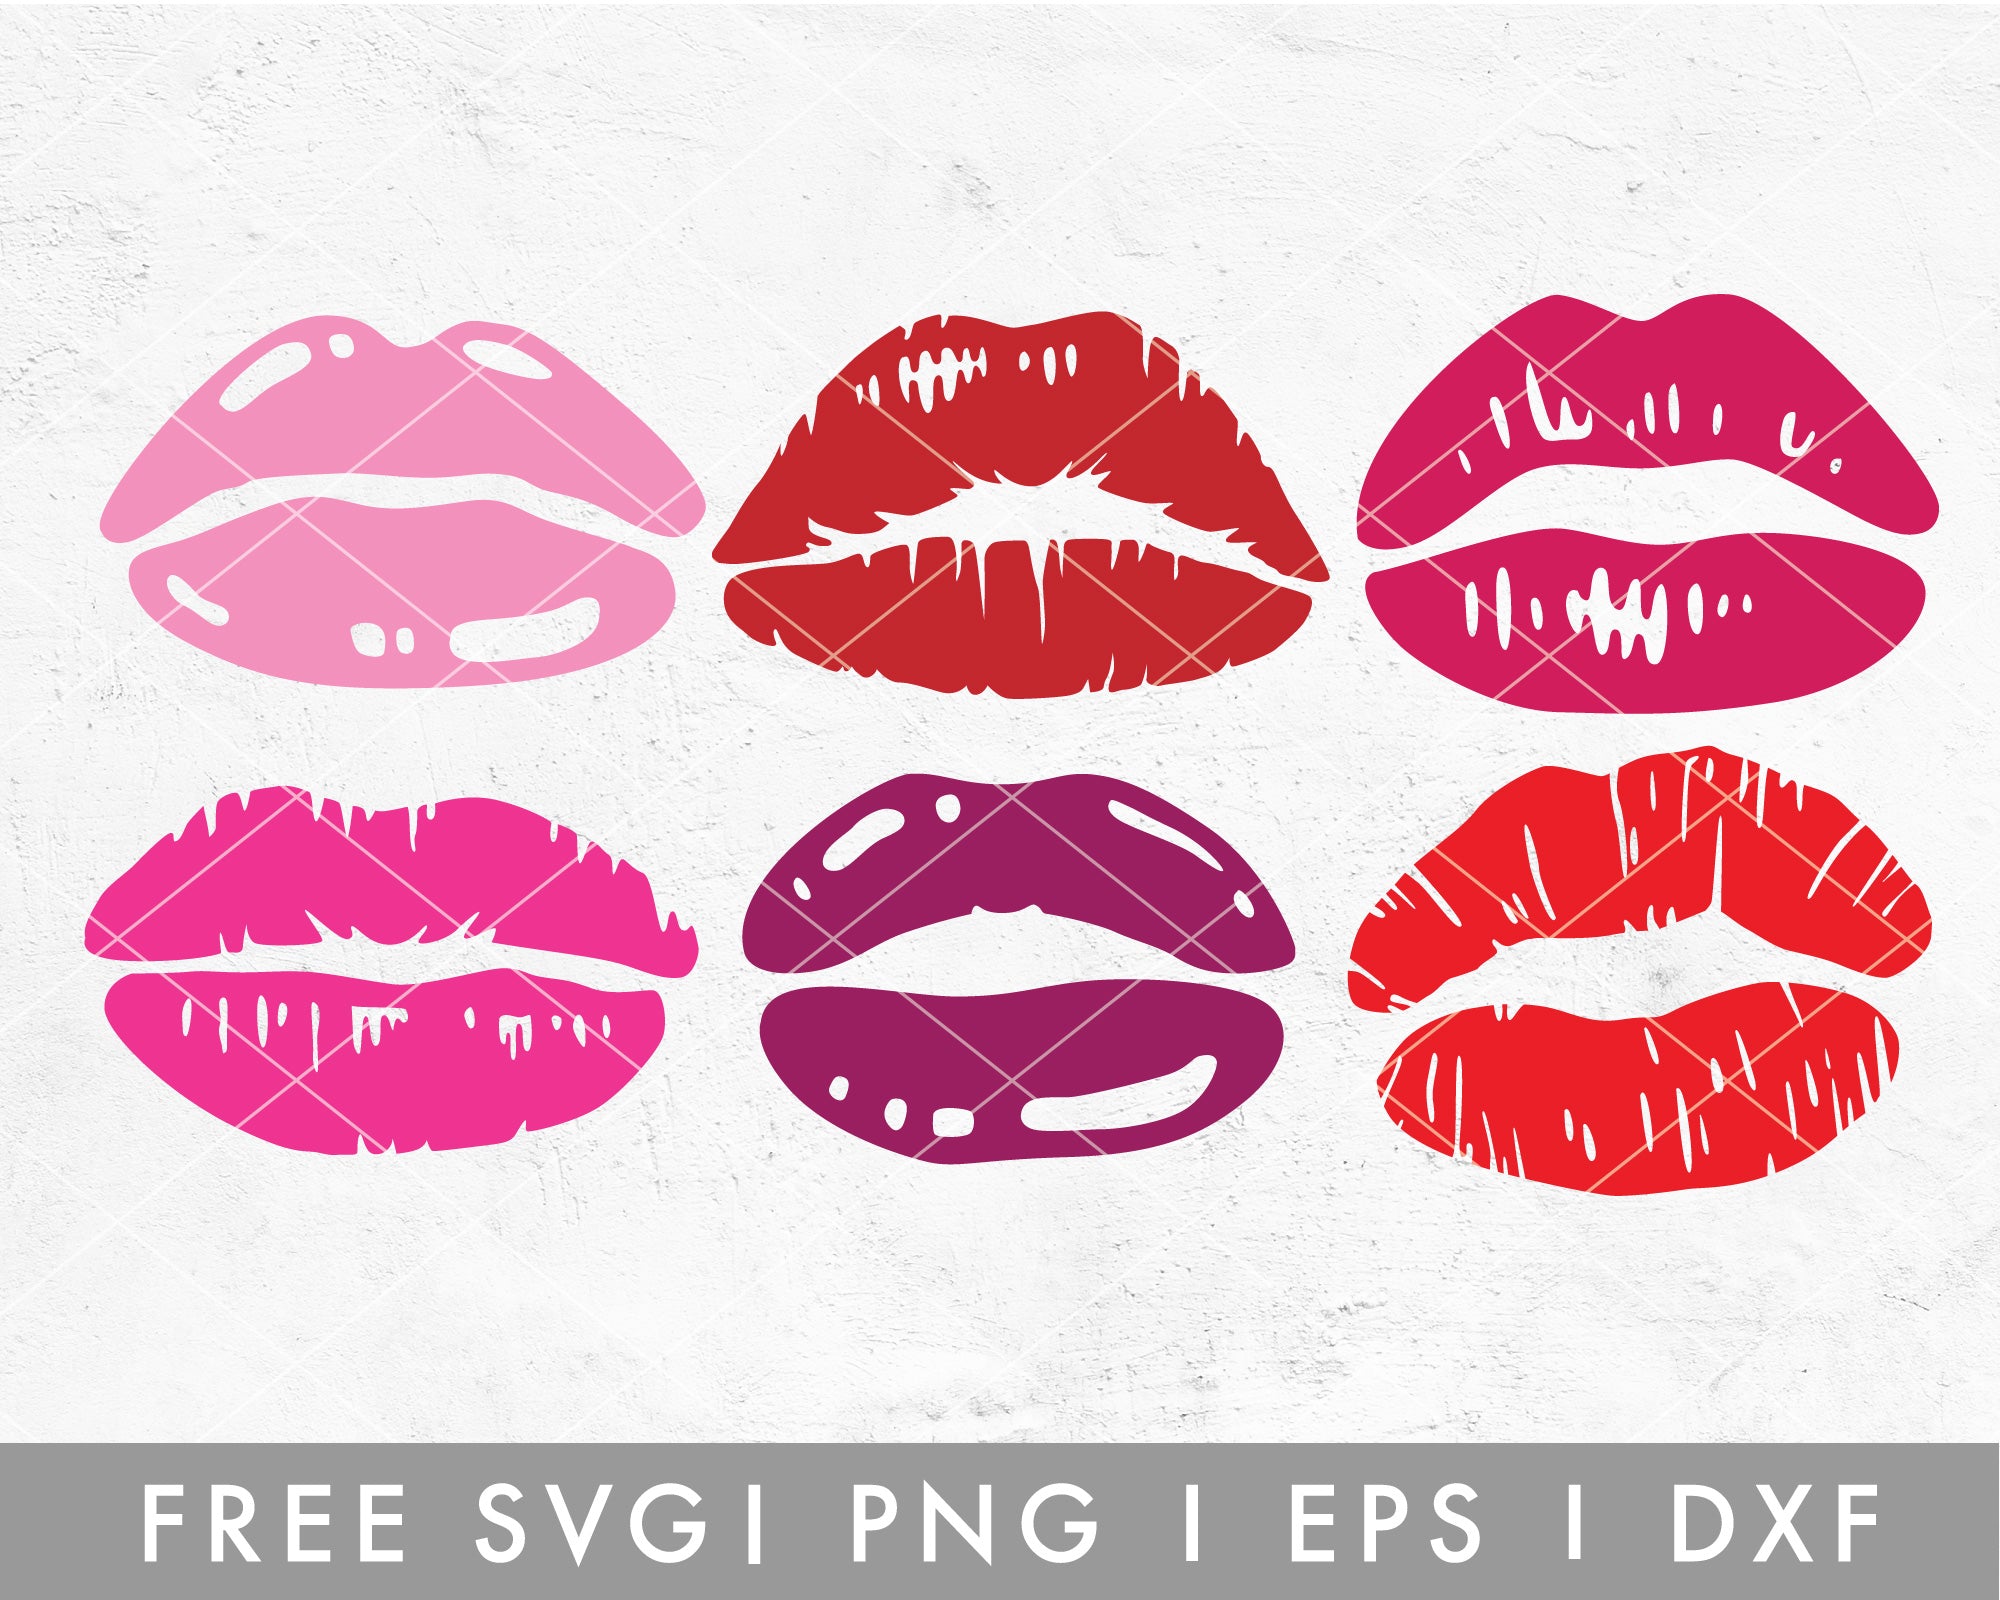 Lips Bundle Graphic by Design SVG · Creative Fabrica